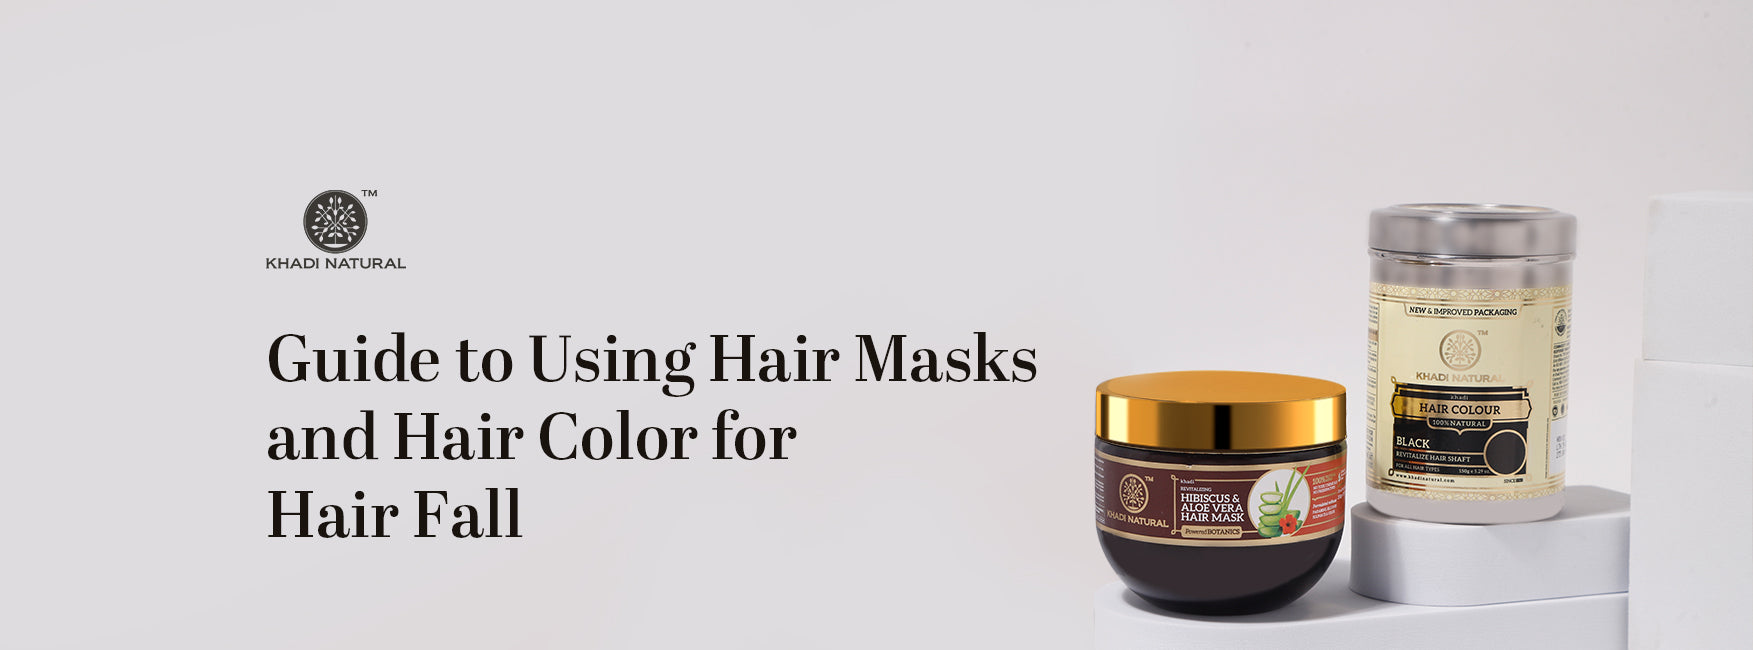 Using Hair Masks and Color to Prevent Hair Fall - Ultimate Guide